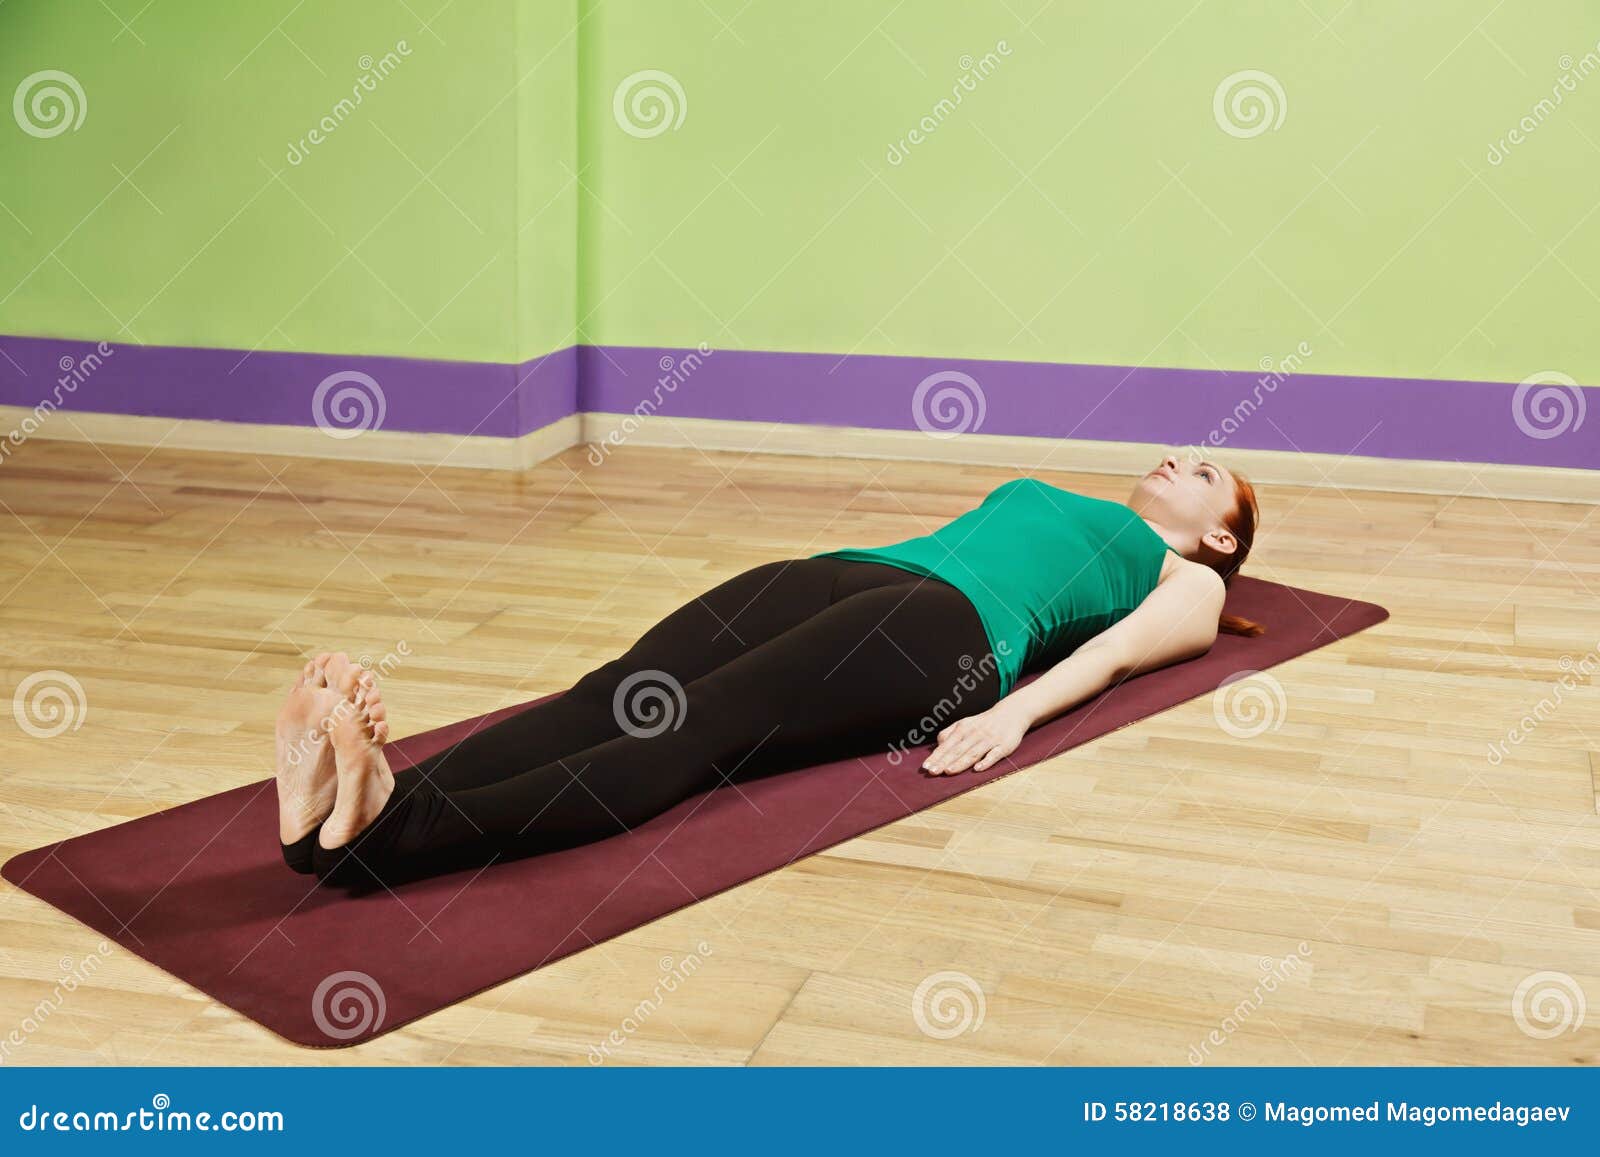 Laying down on mat pose stock photo. Image of pose, body - 58218638